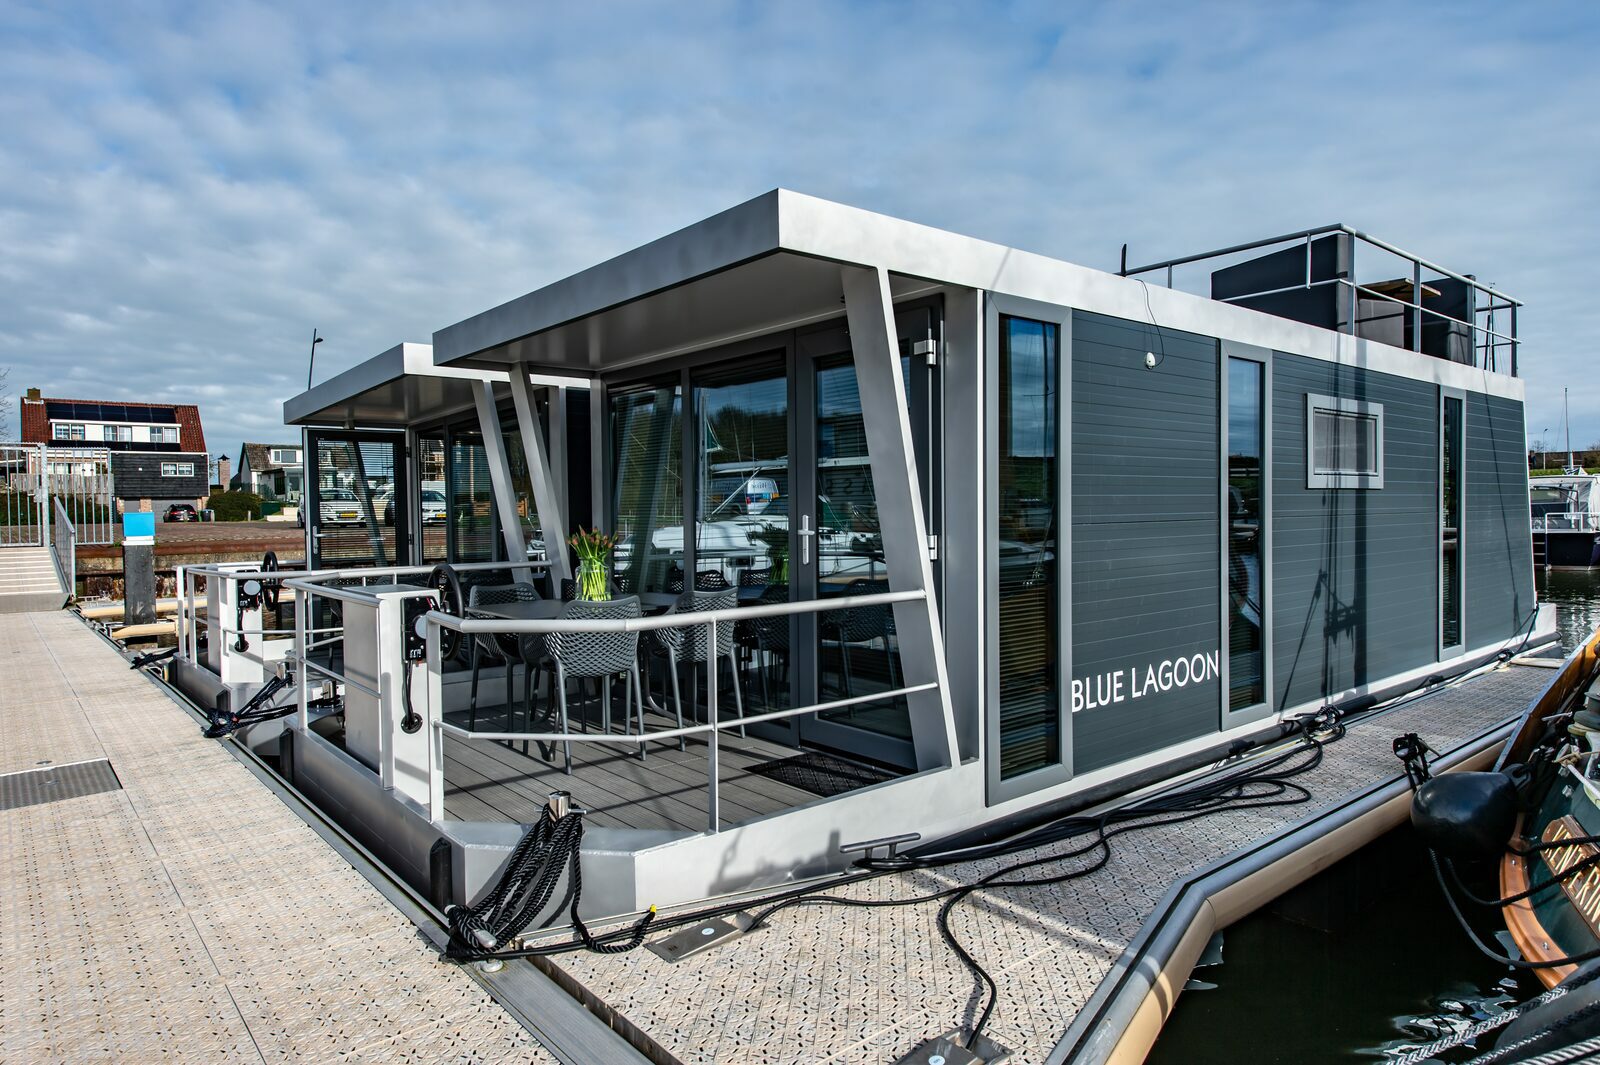 Waterlodge for 4 personsn on the Veerse Meer